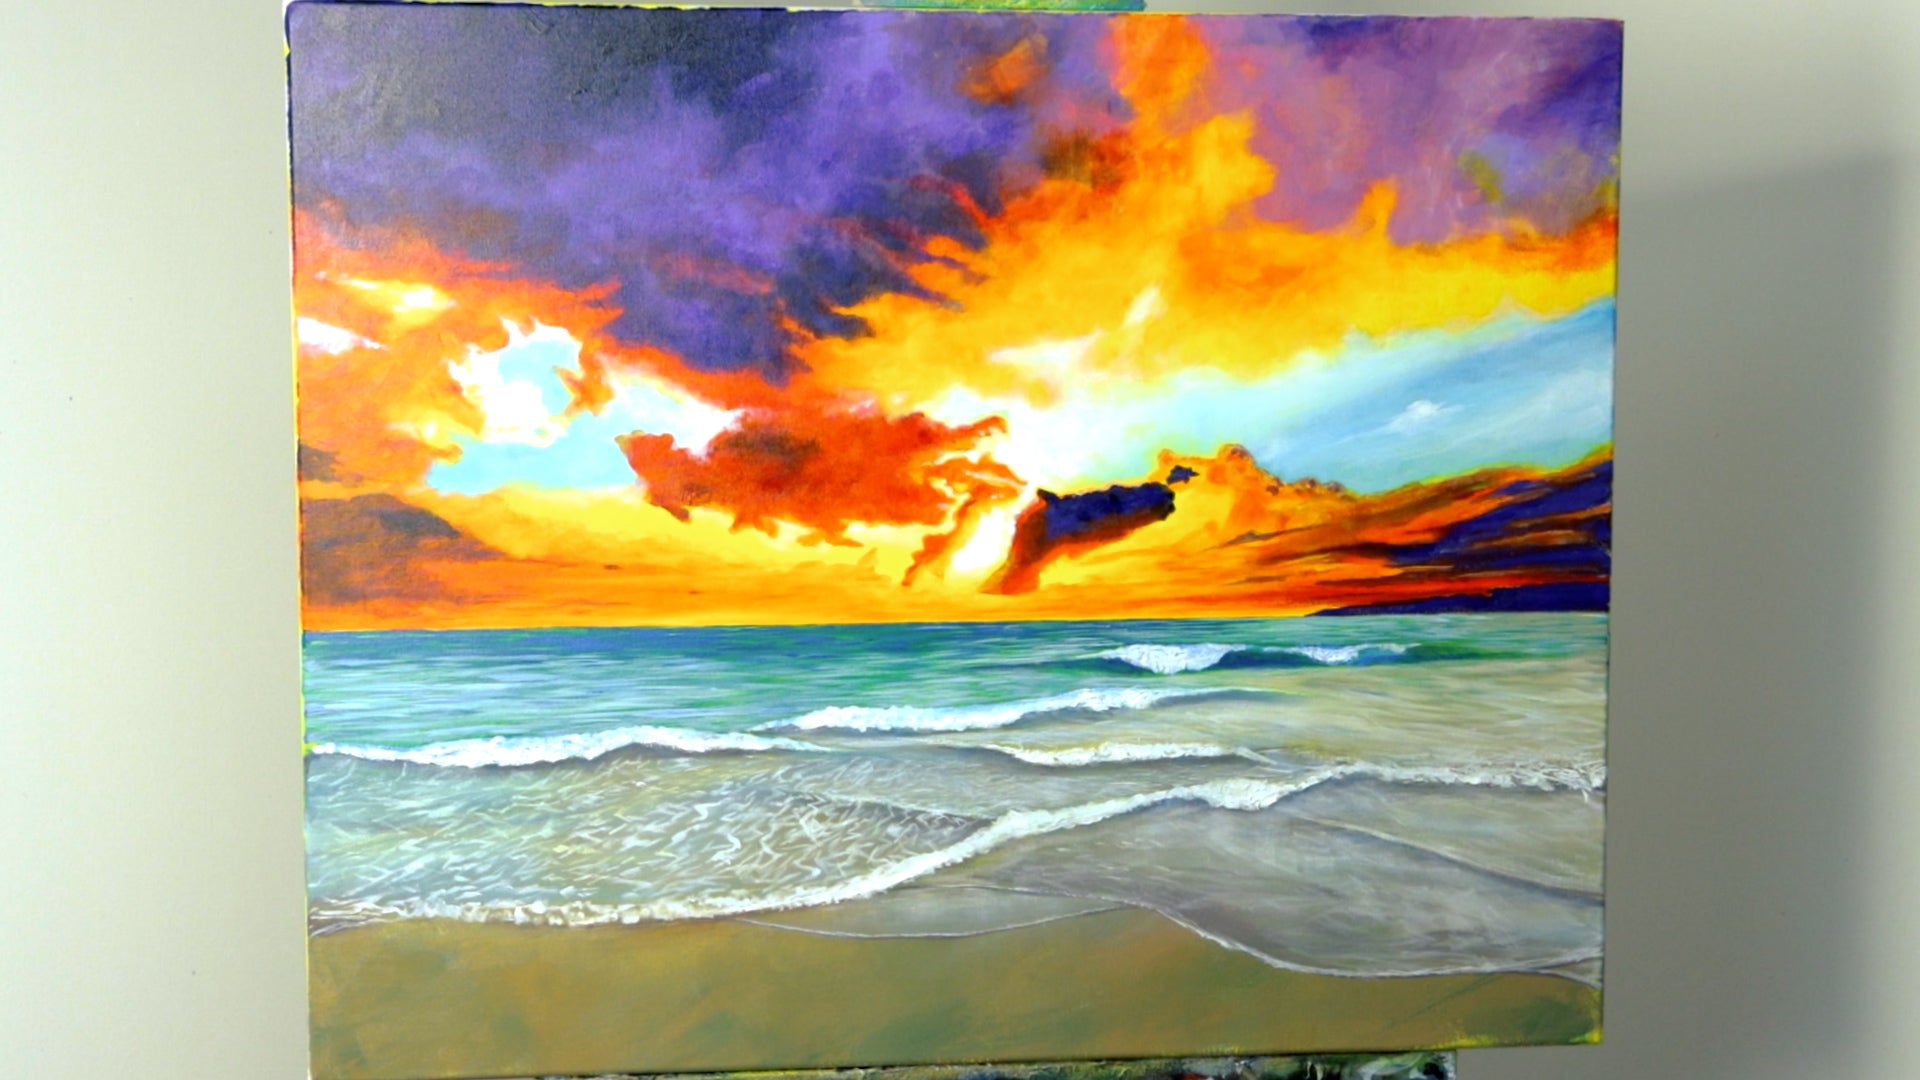 1. Sunset beach painting with brightly coloured sky and tanslucent ocean